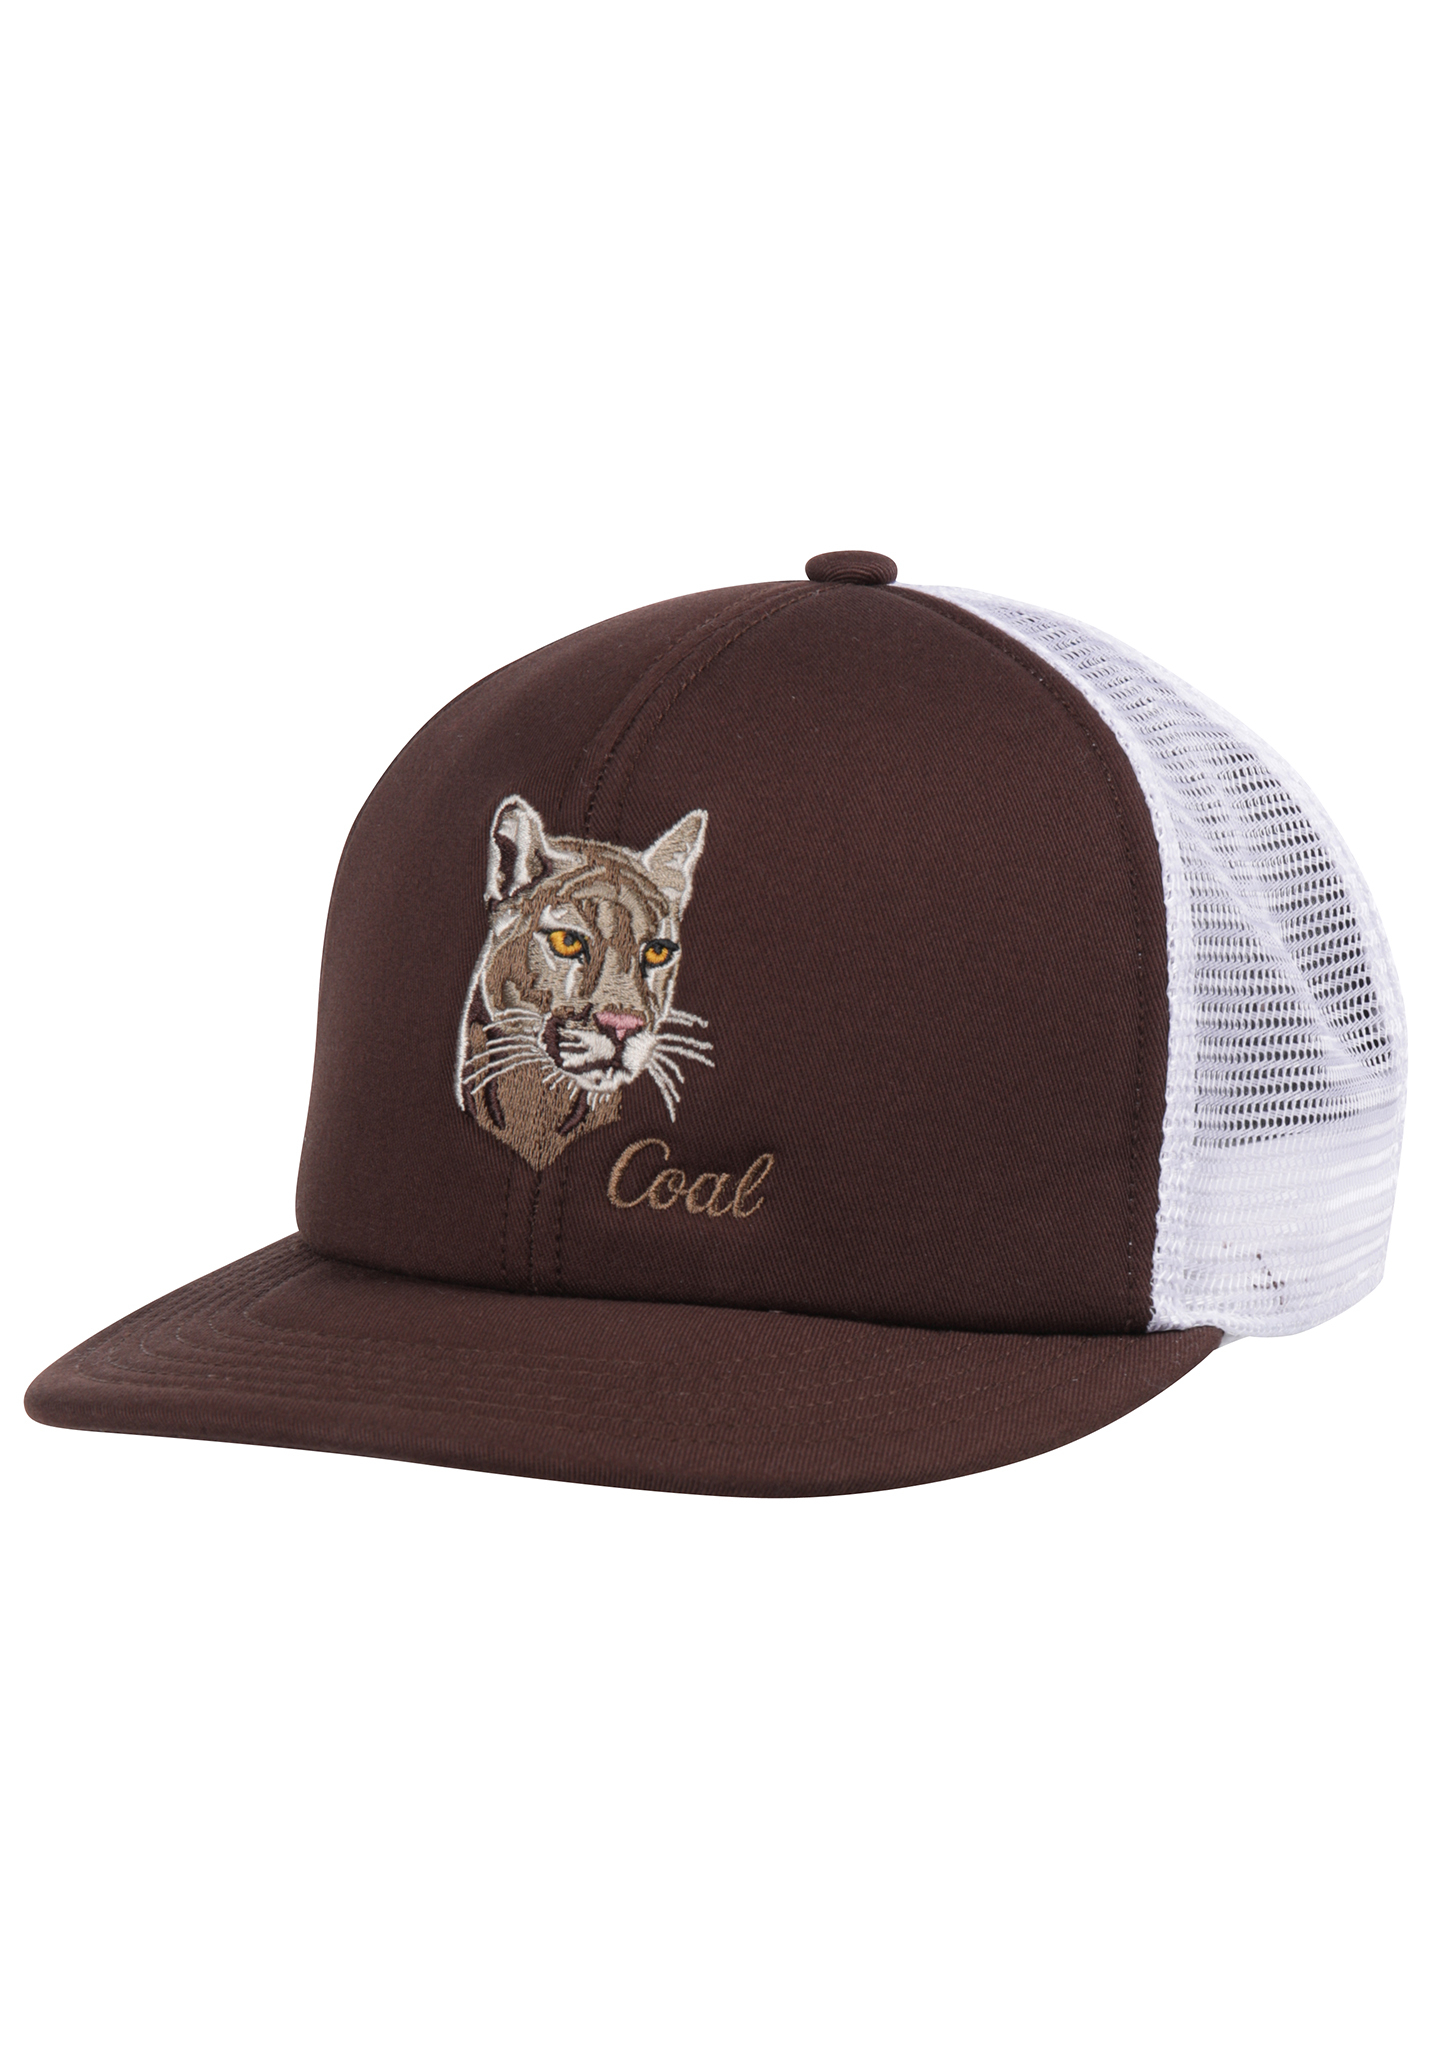 Coal The Wilds Snapback Cap brown One Size